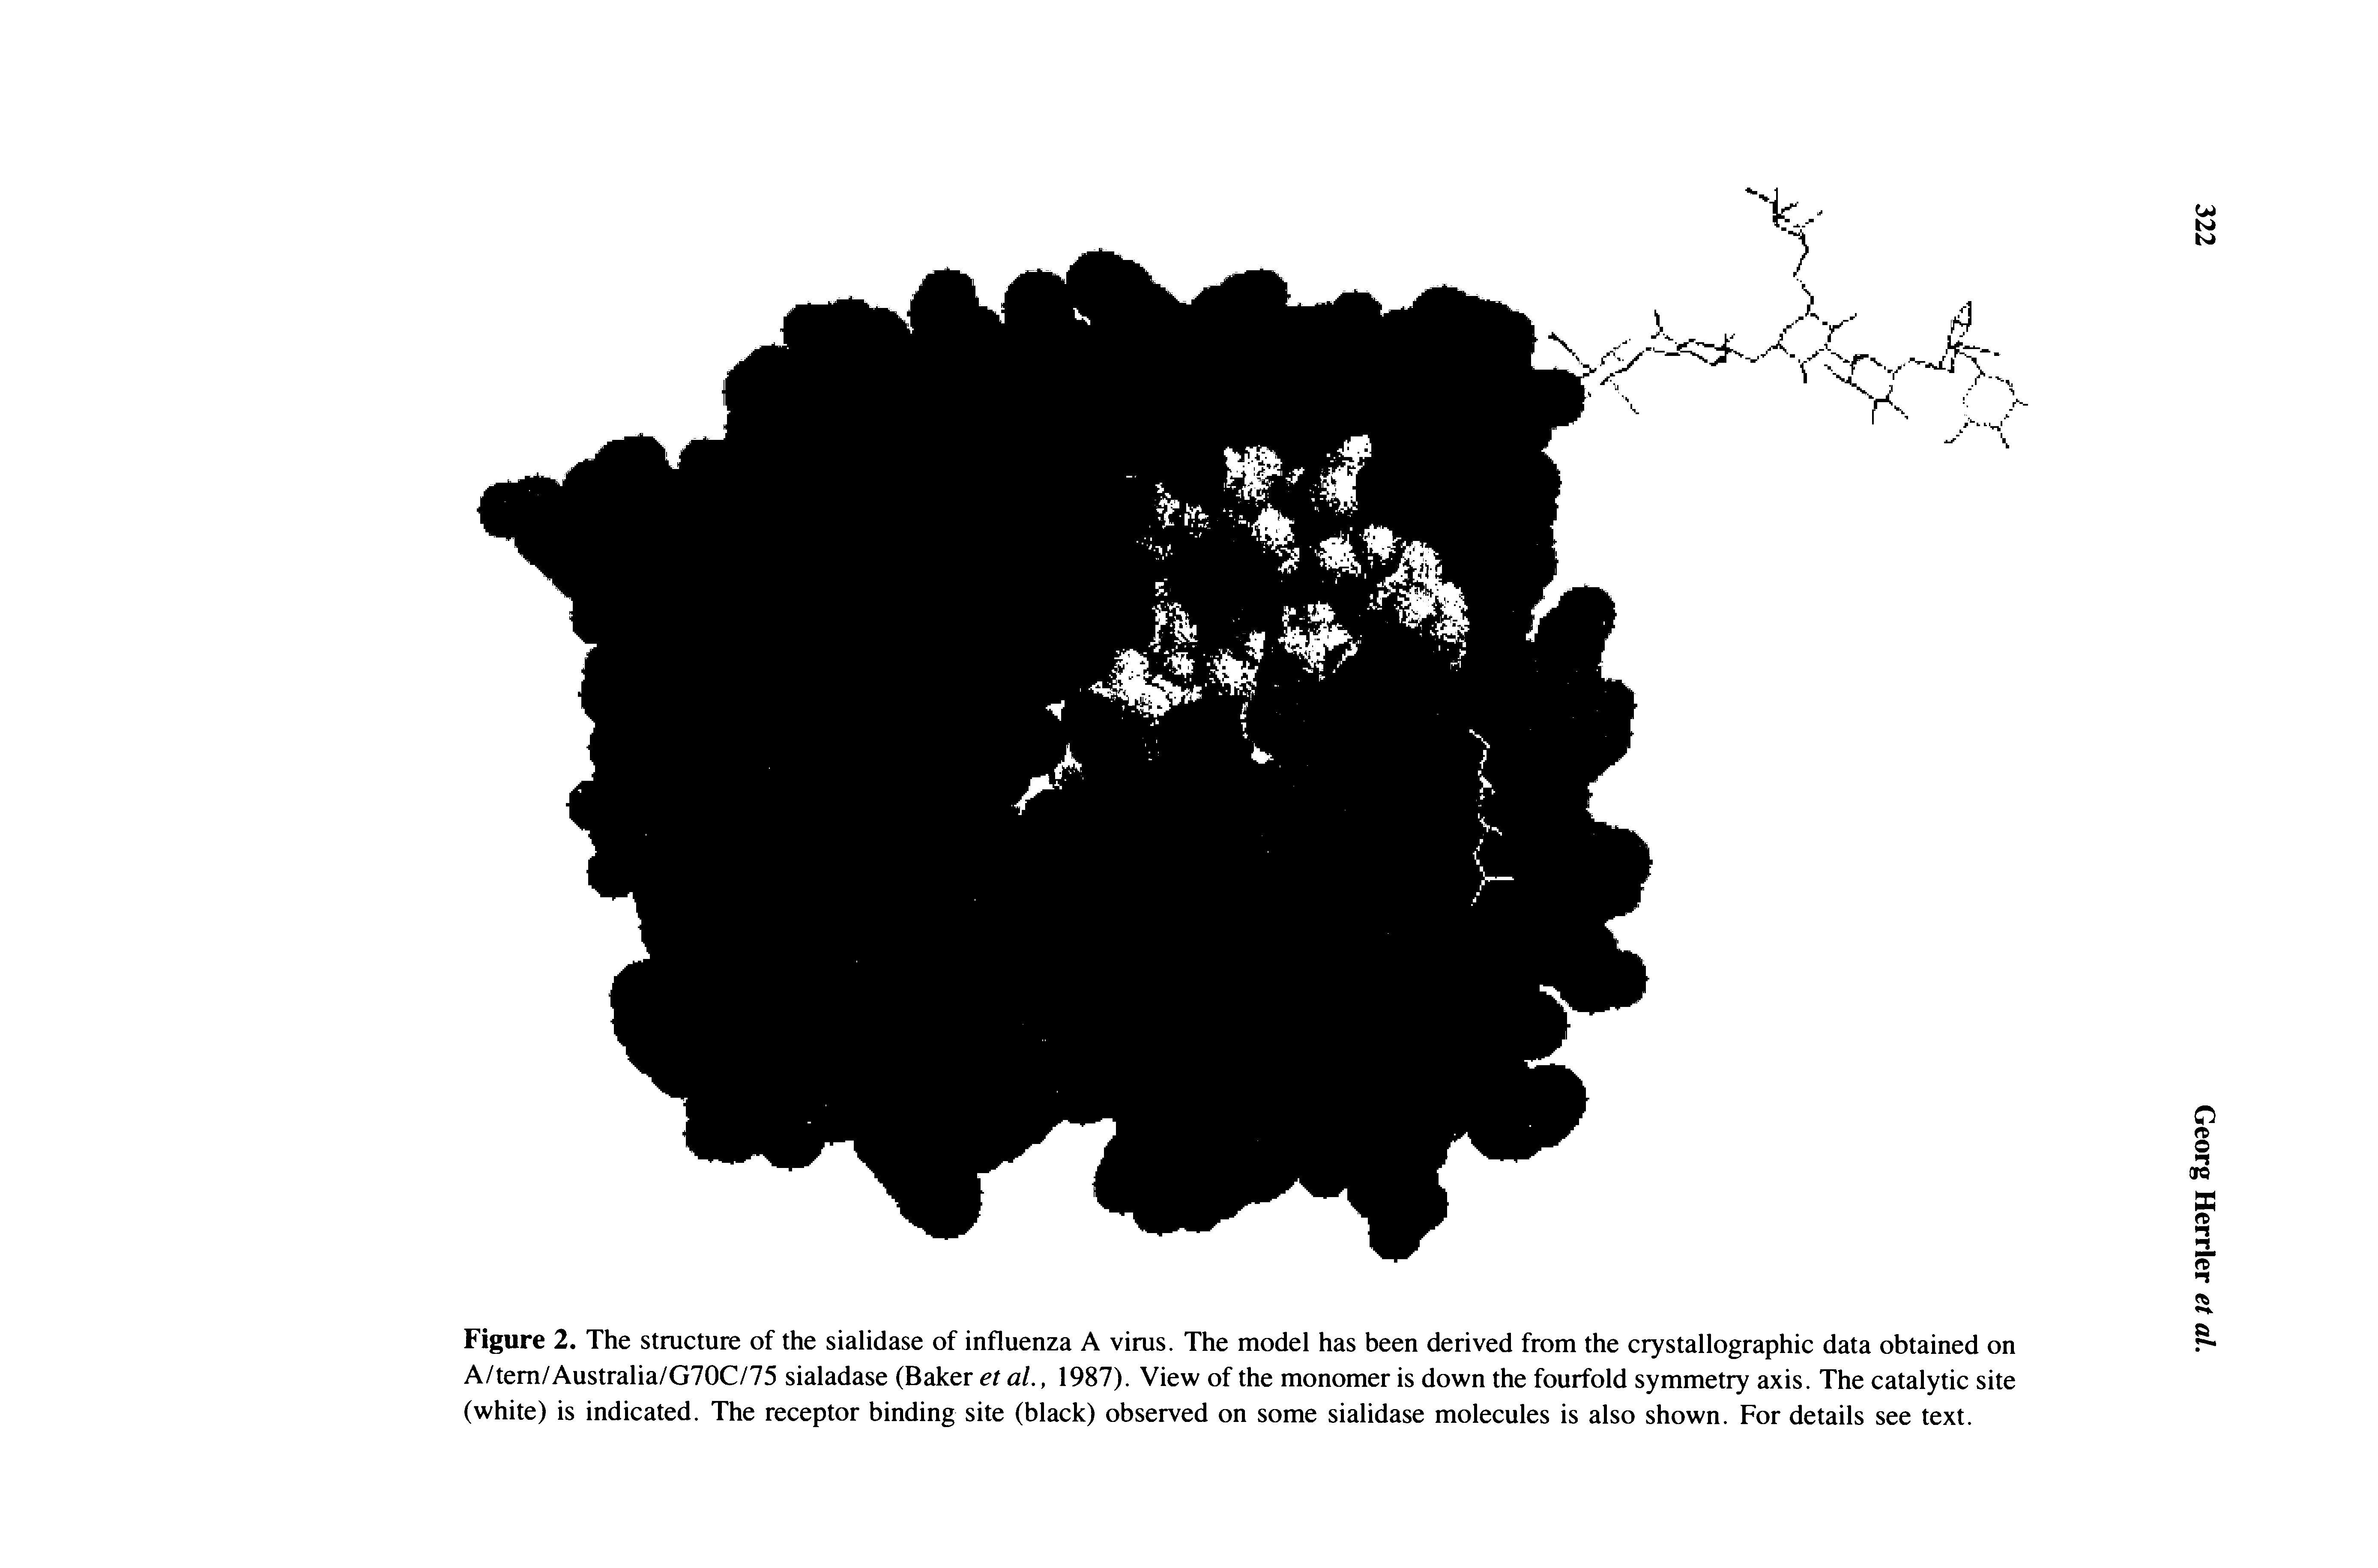 Figure 2. The structure of the sialidase of influenza A virus. The model has been derived from the crystallographic data obtained on A/tem/Australia/G70C/75 sialadase (Baker et al., 1987). View of the monomer is down the fourfold symmetry axis. The catalytic site (white) is indicated. The receptor binding site (black) observed on some sialidase molecules is also shown. For details see text.